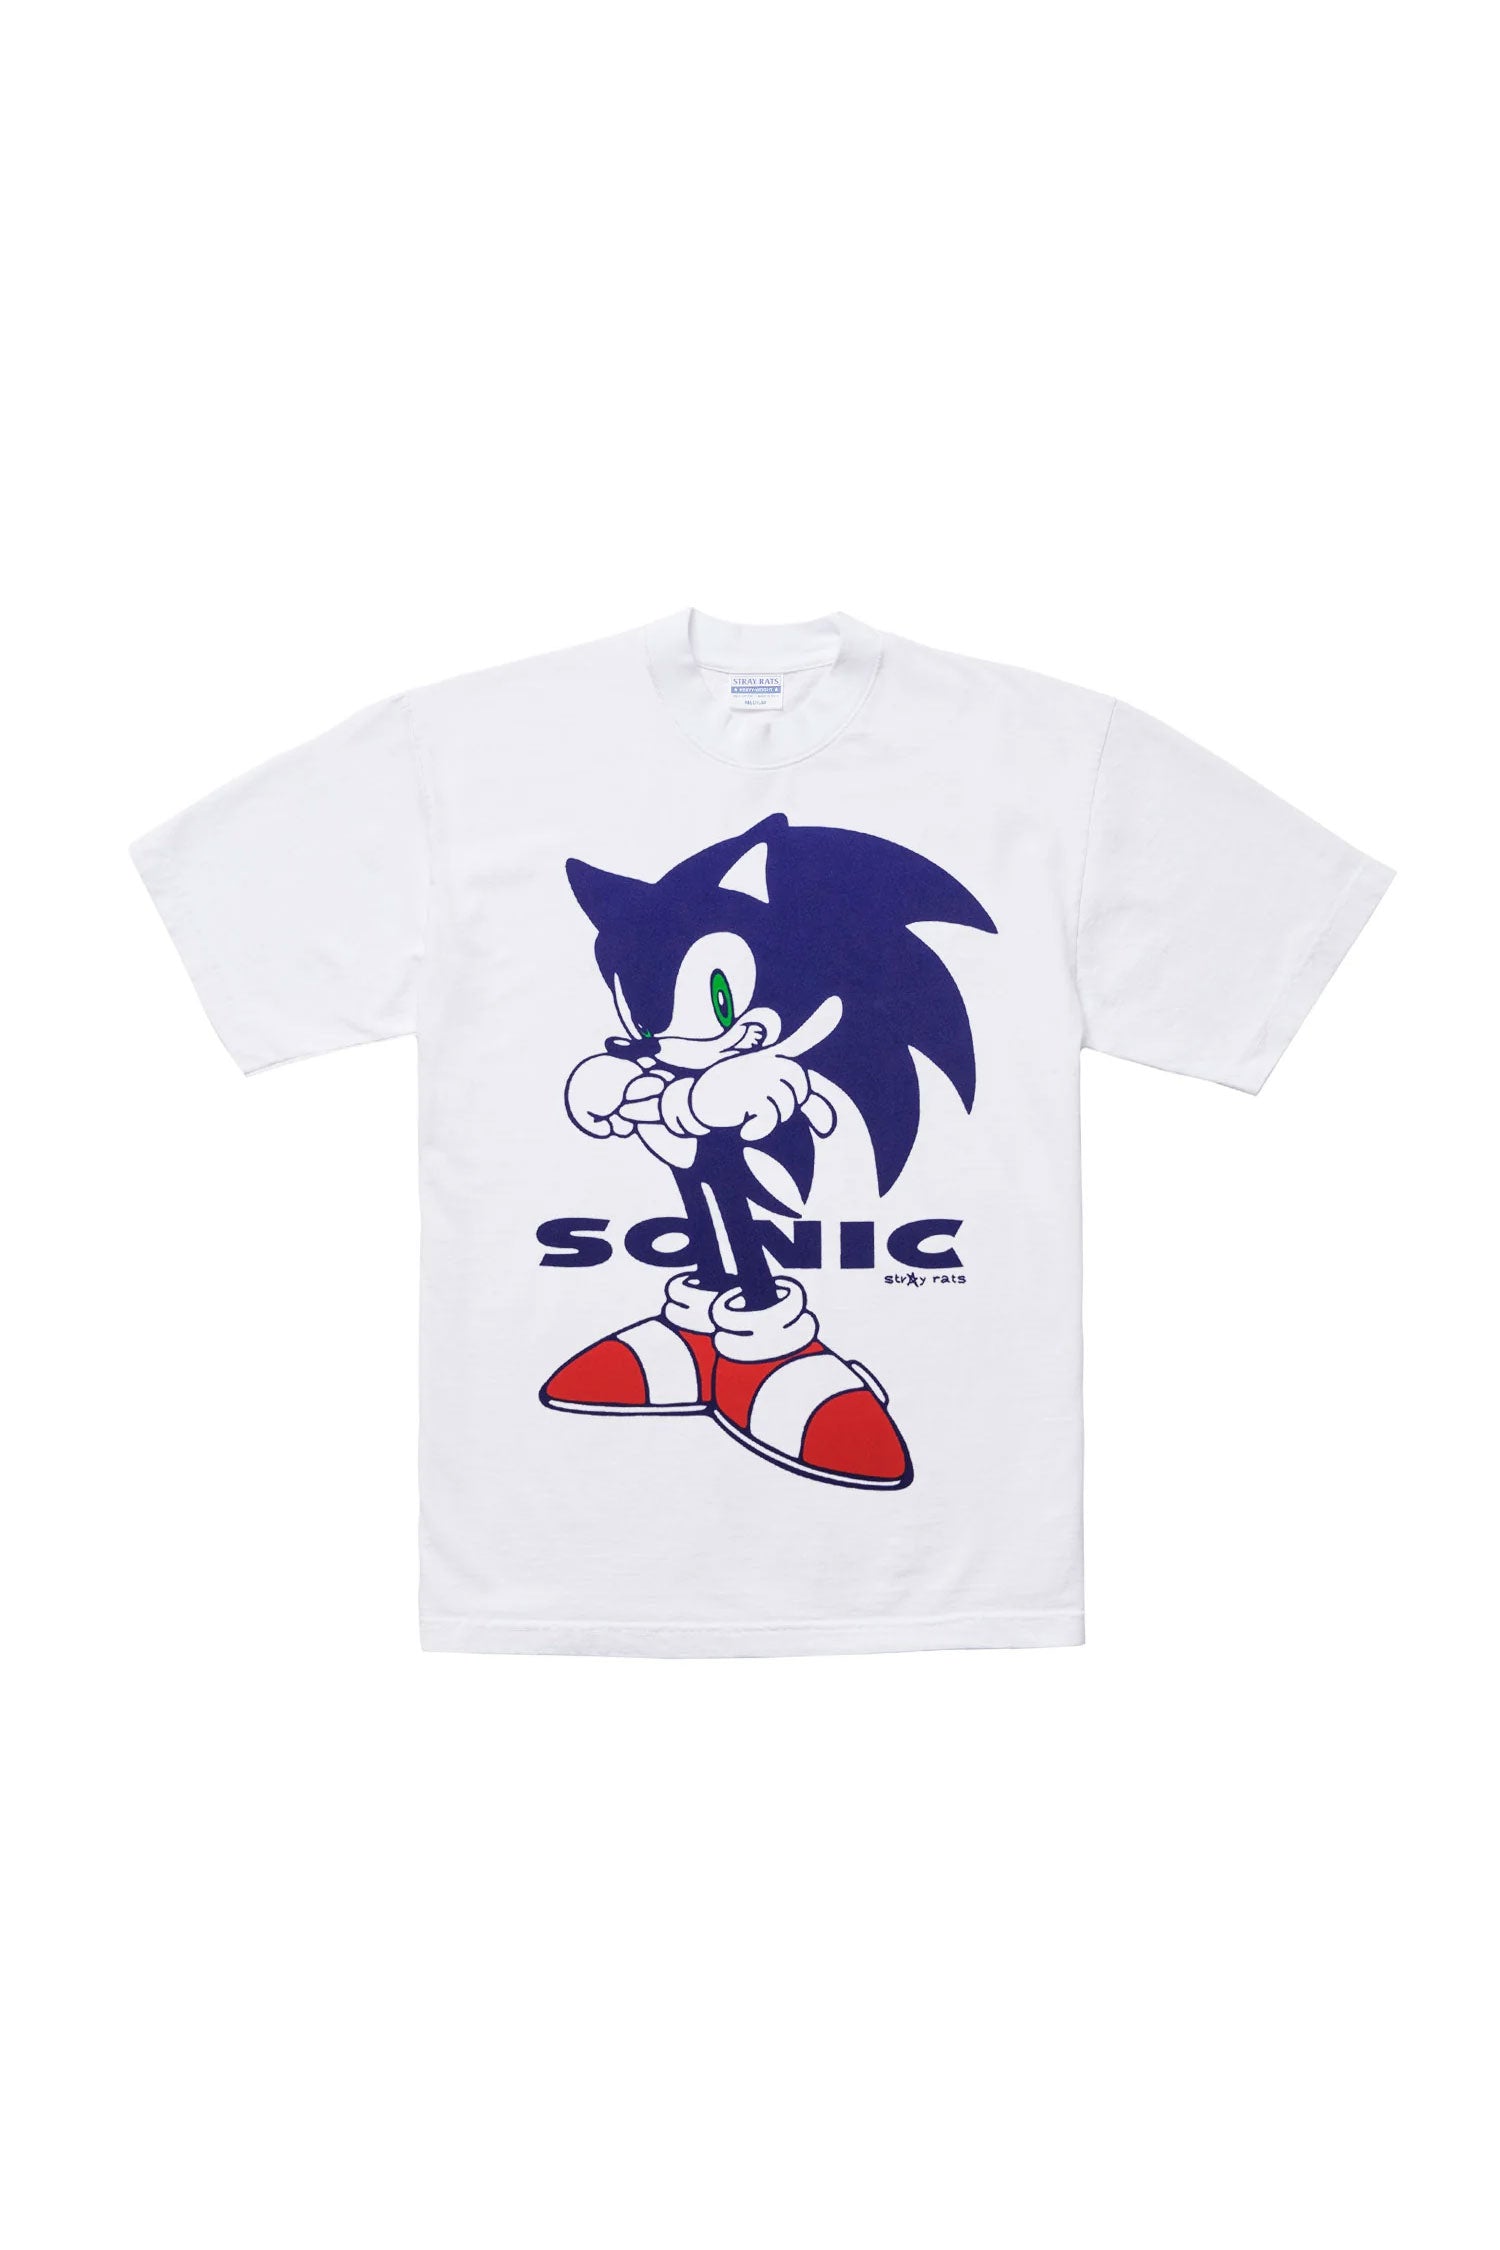 The STRAY RATS x SONIC - SONIC TEE  available online with global shipping, and in PAM Stores Melbourne and Sydney.